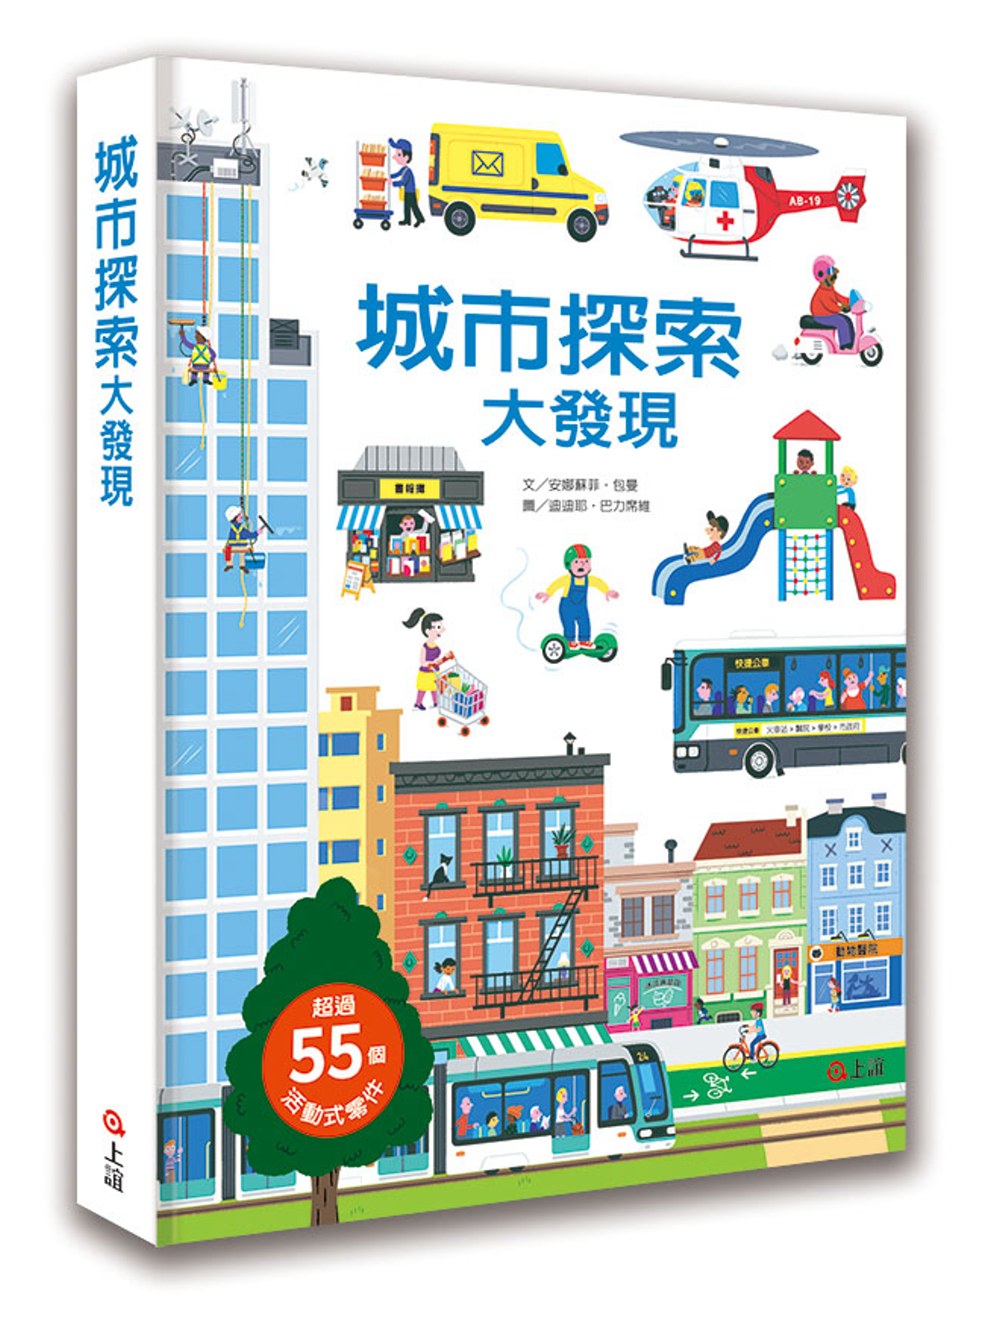 The Ultimate Book of Cities • 城市探索大發現